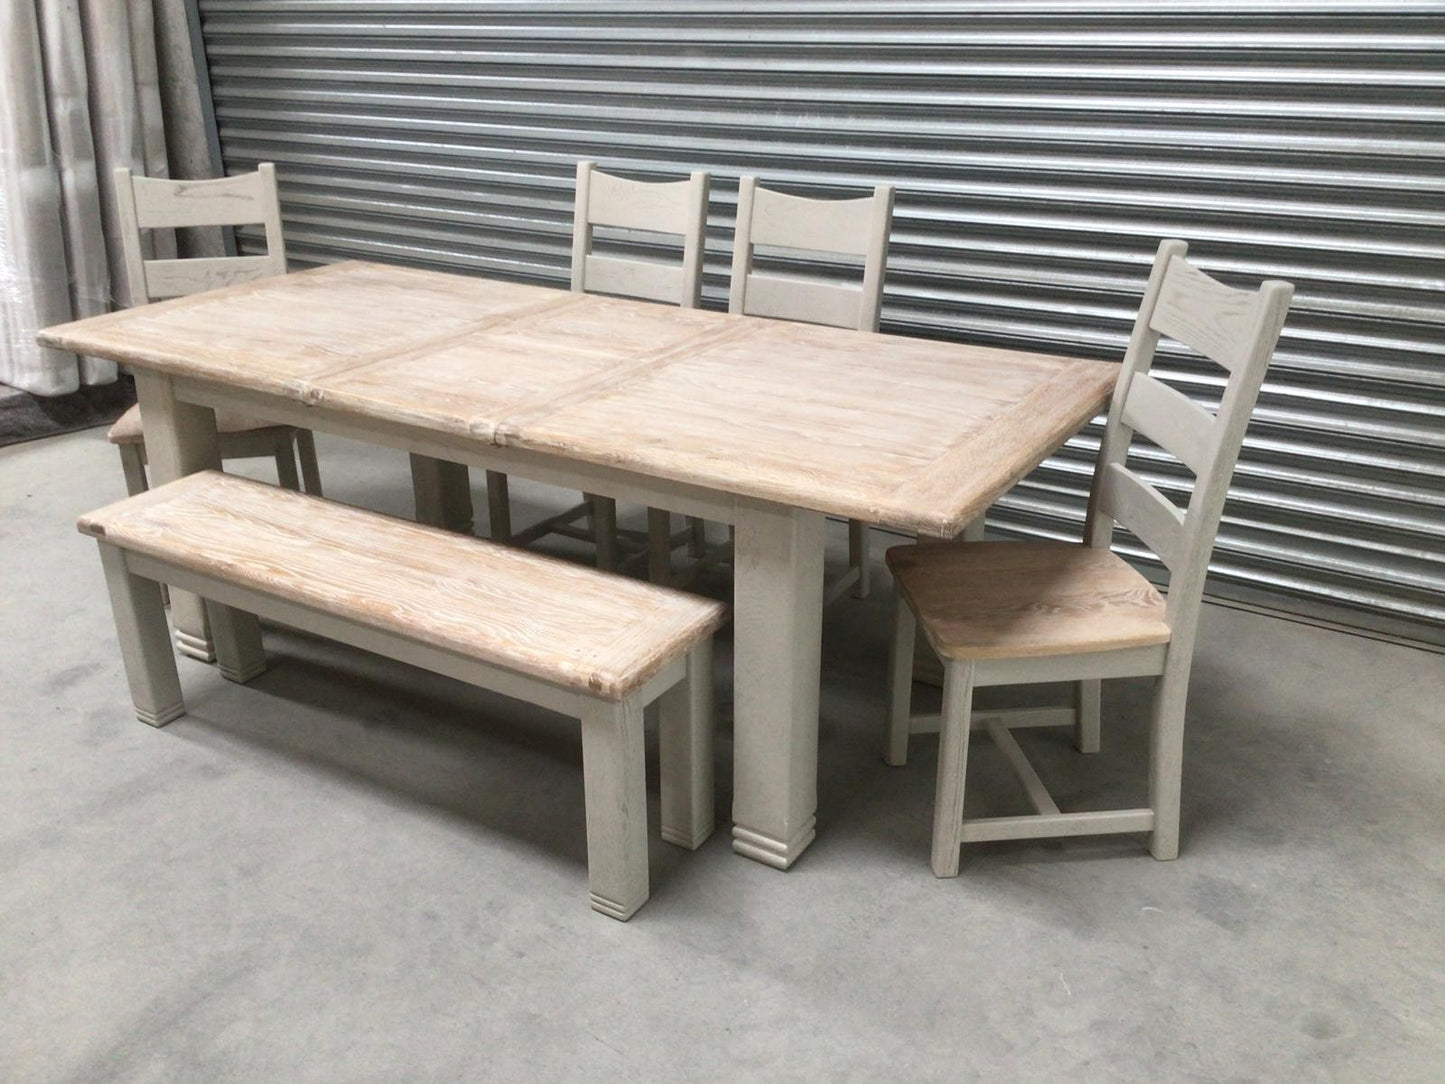 Danube Oak 1.8m Ext Dining Set painted Oyster with a Washed Finish - Ex- Display Model